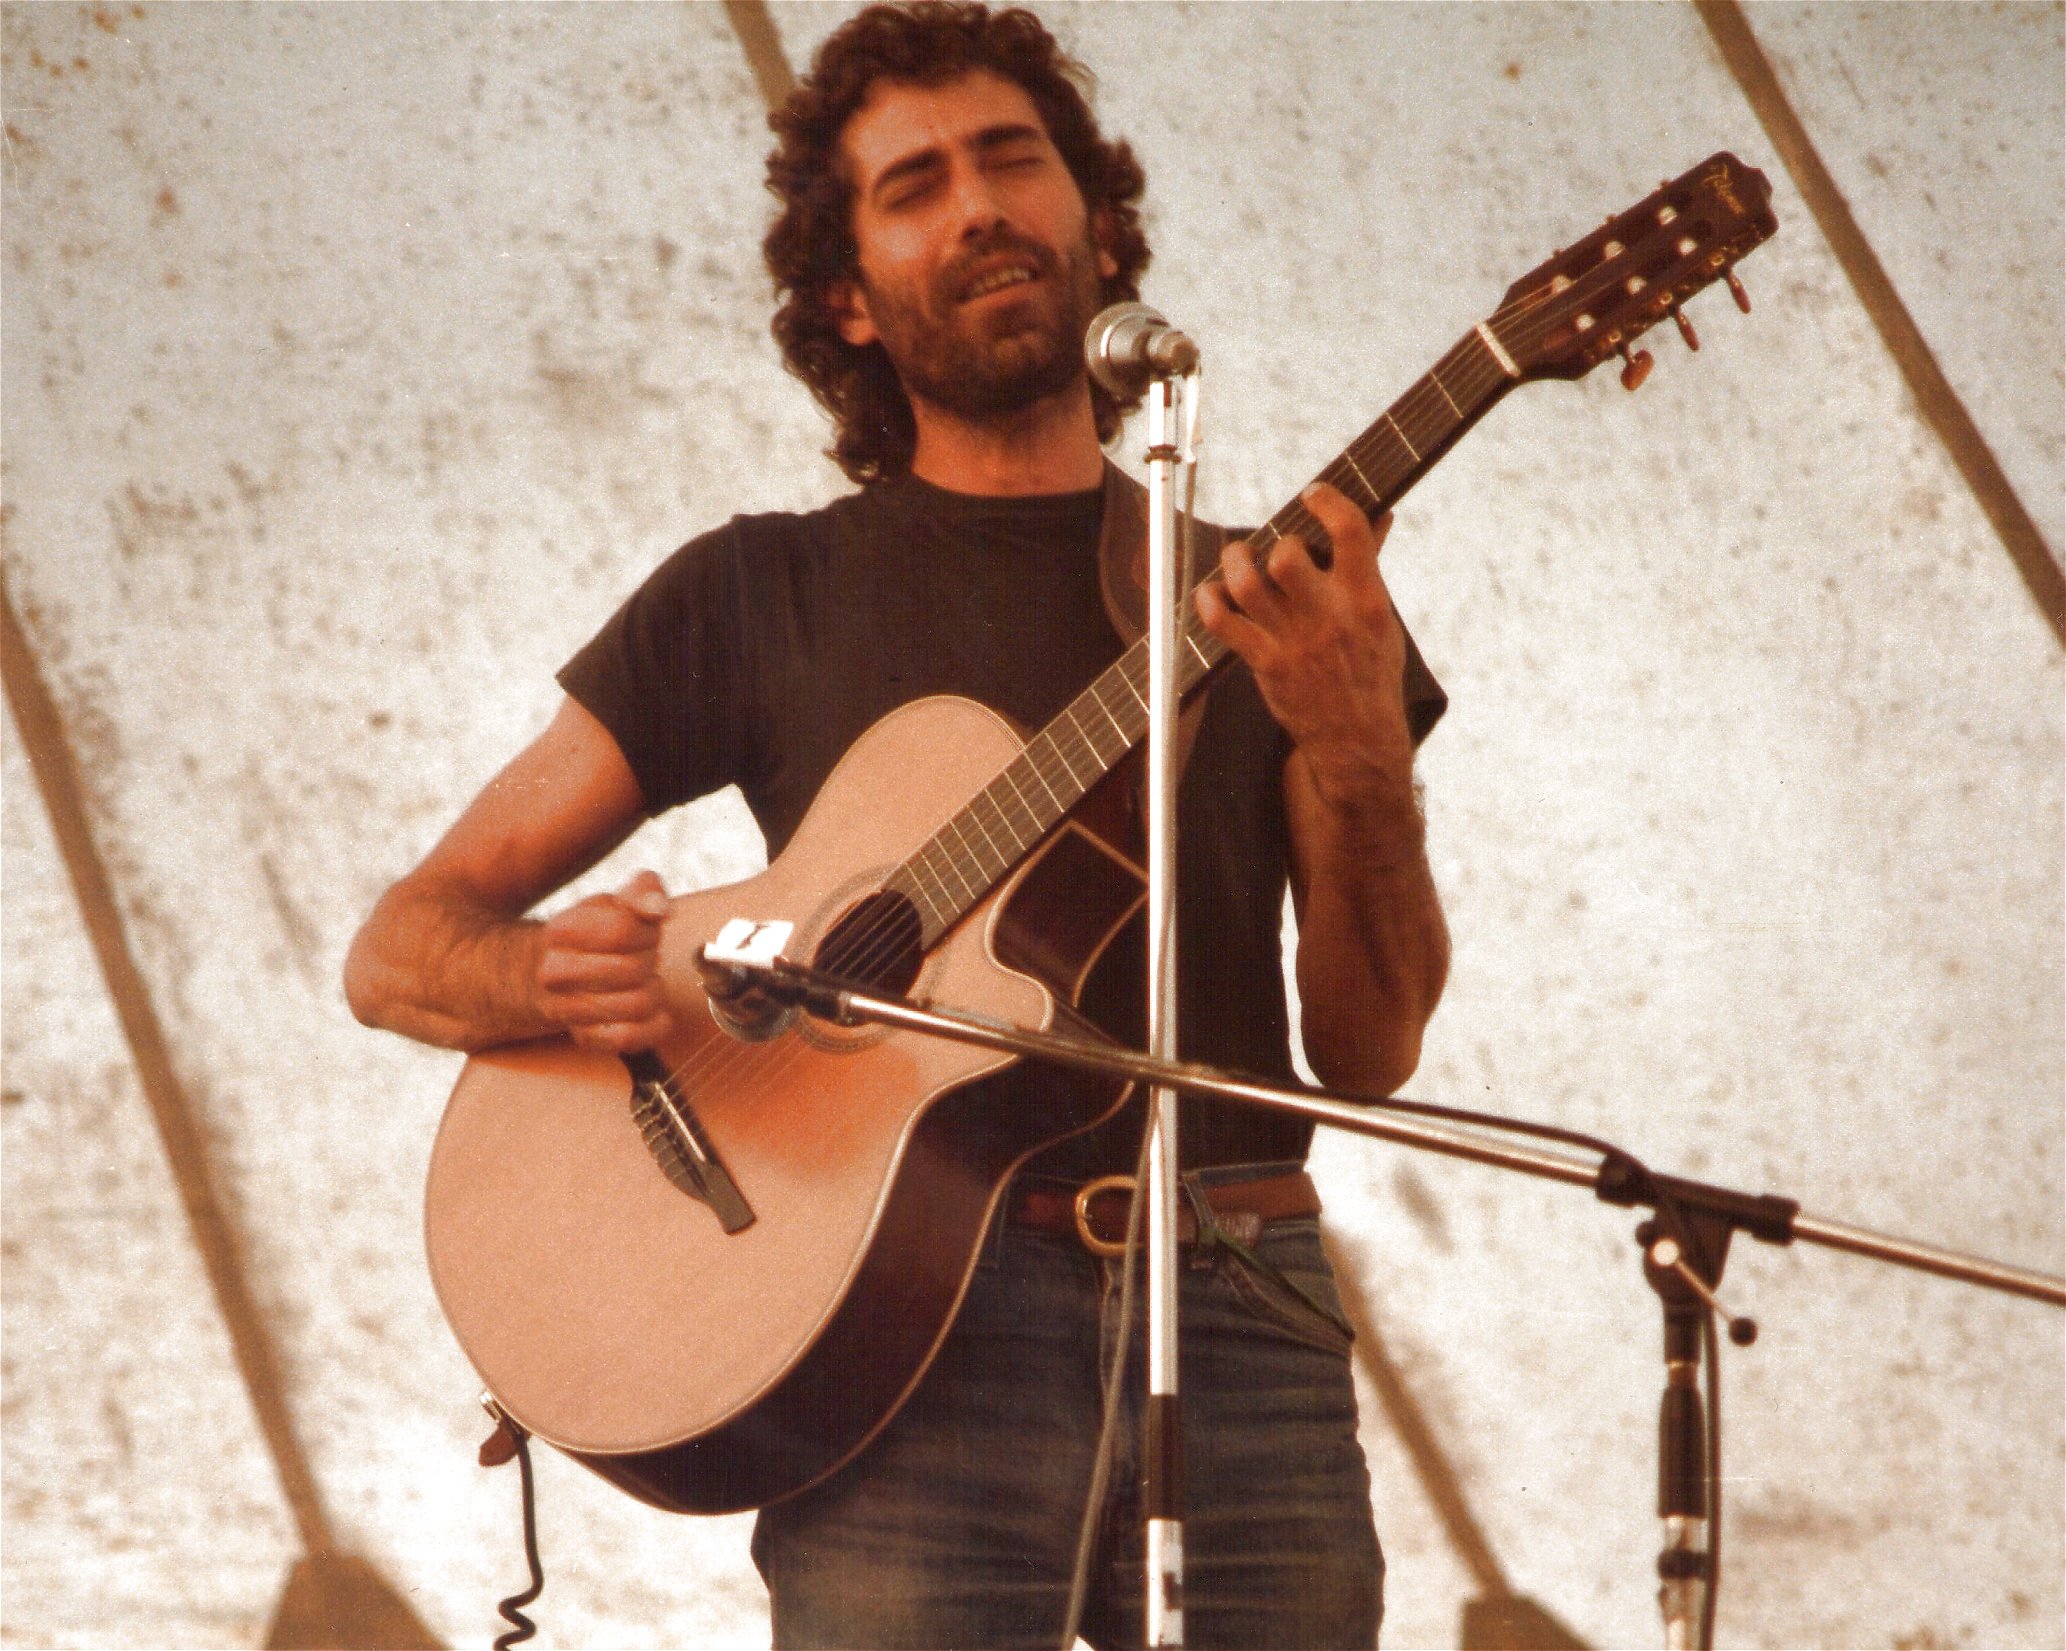 Guillory on stage at the 1985 Cambridge Folk Festival